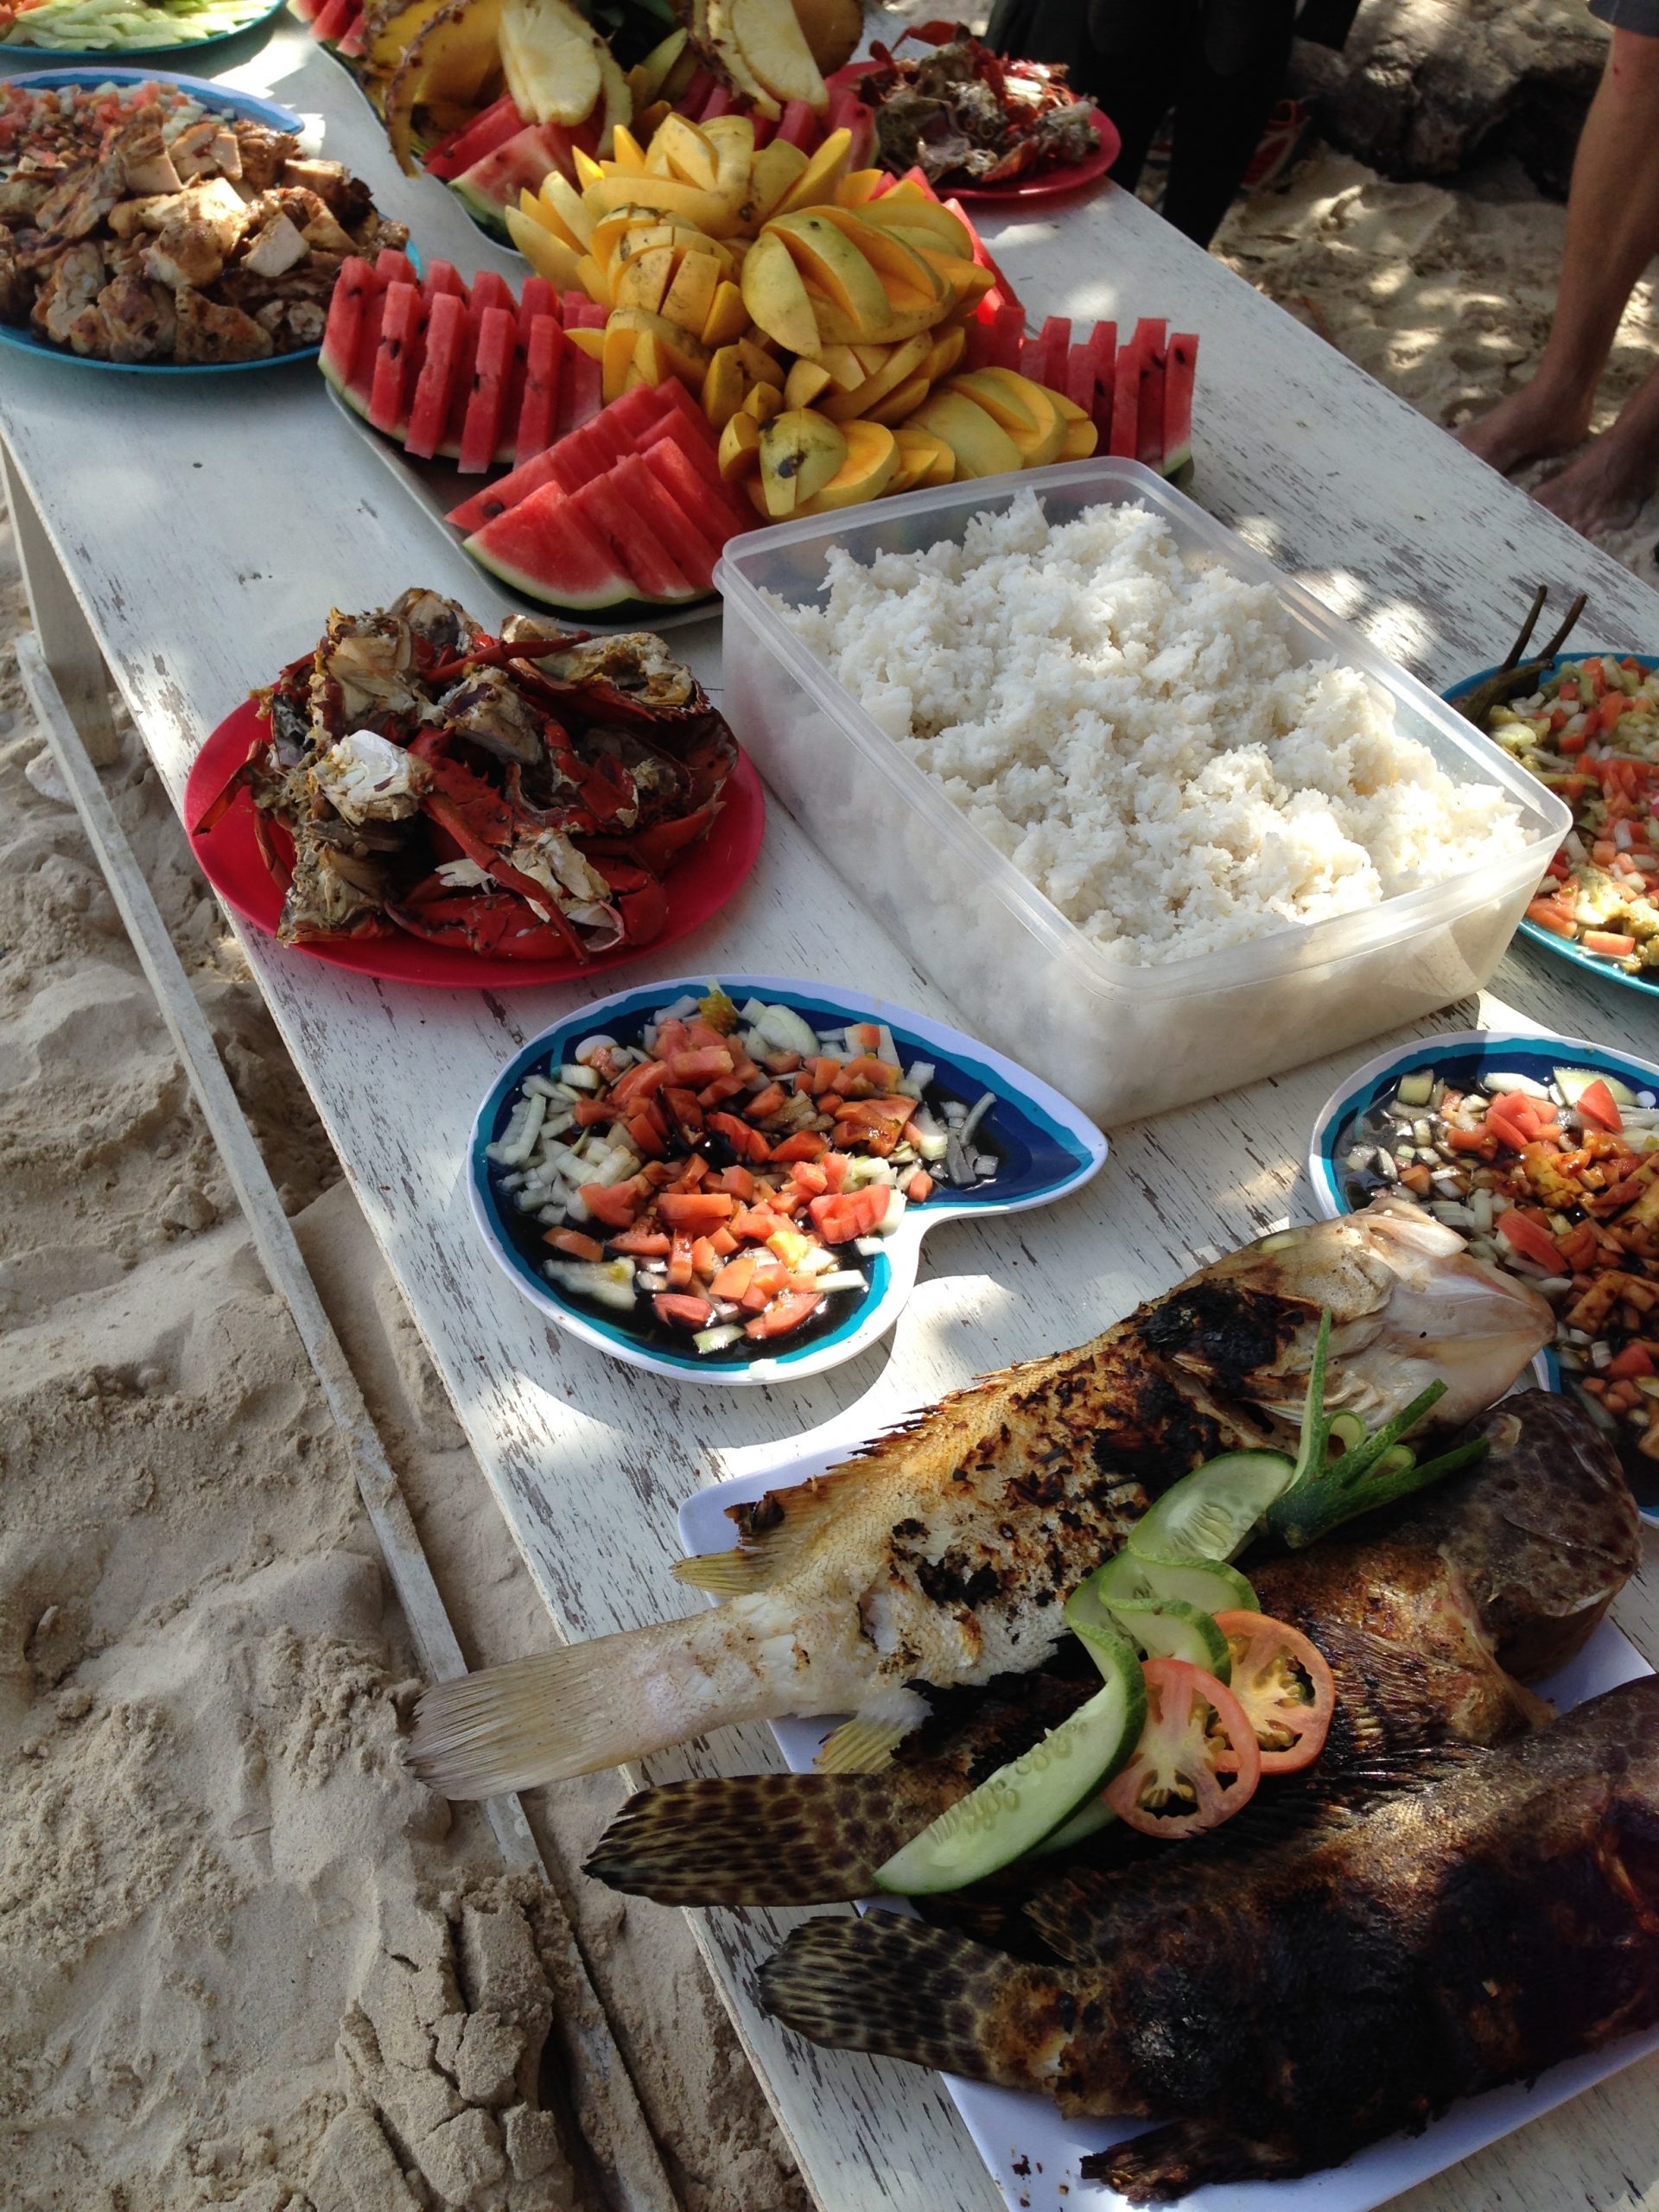 The lunch spread on our island hopping excursion